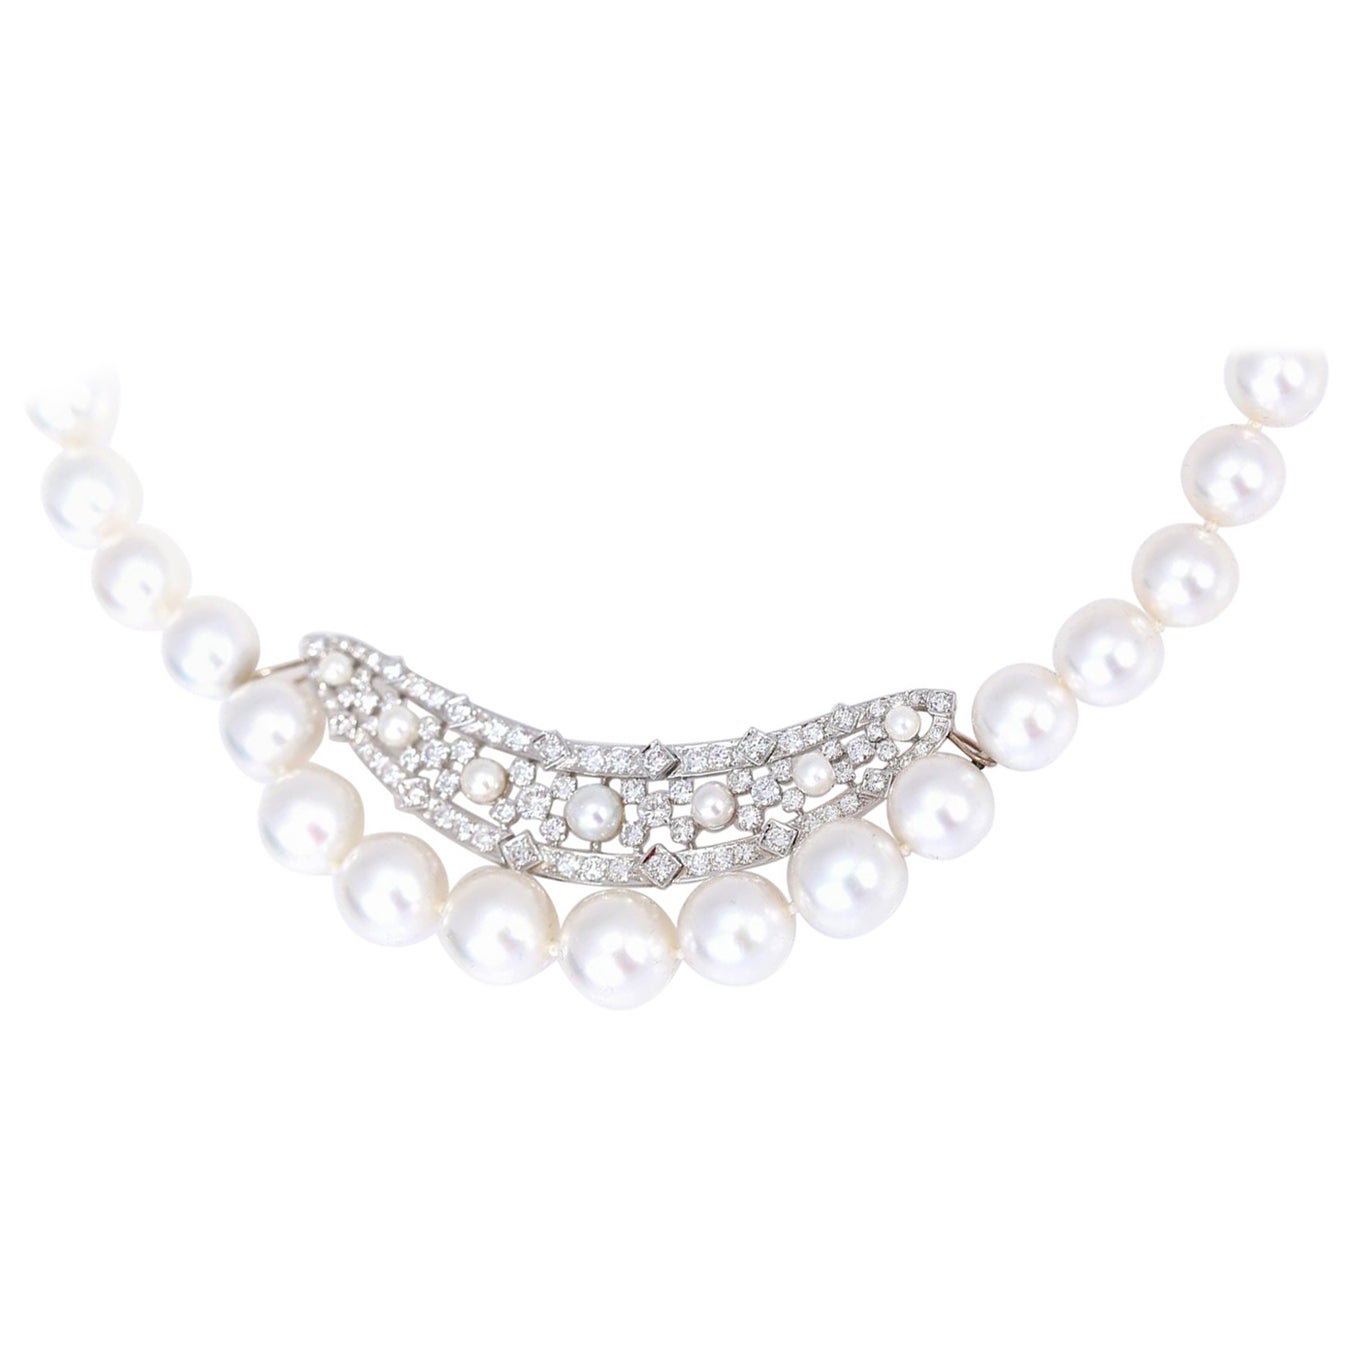 Pearls Diamonds 2.5 Carat Necklace AAA Quality, 2020 For Sale